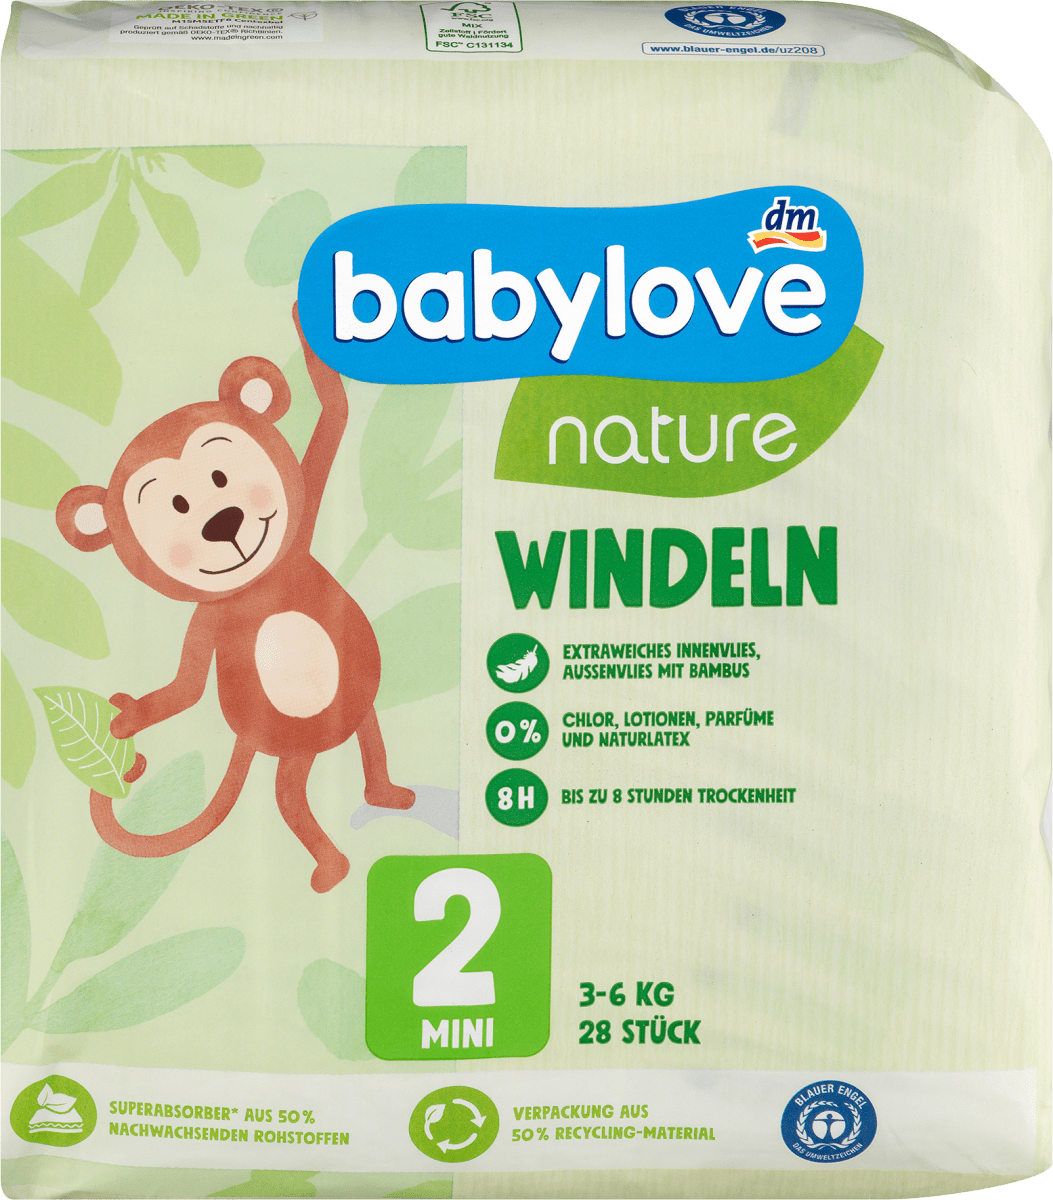 babylove pampers 2